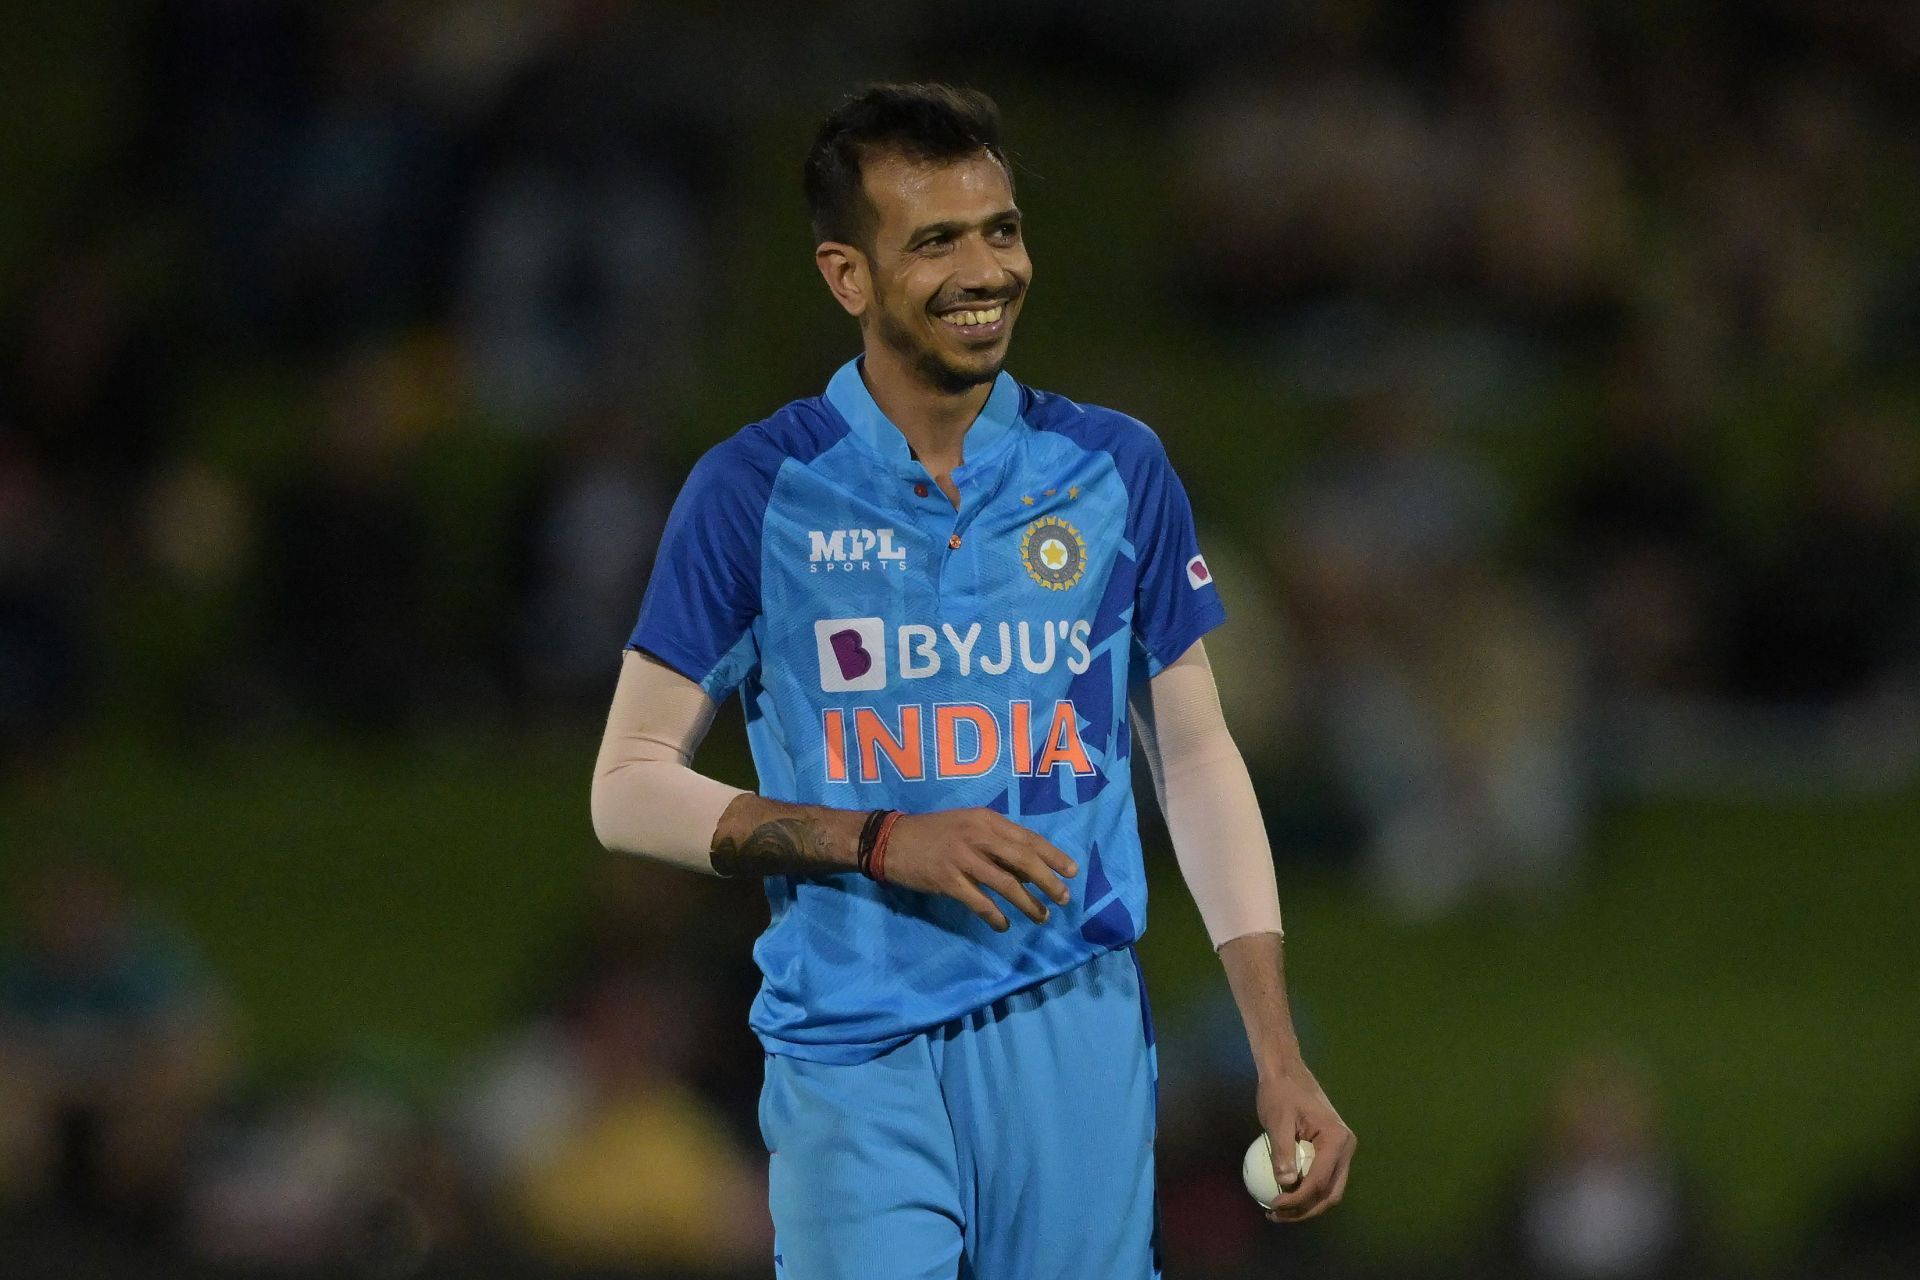 Yuzvendra Chahal is on the verge of reaching a great landmark